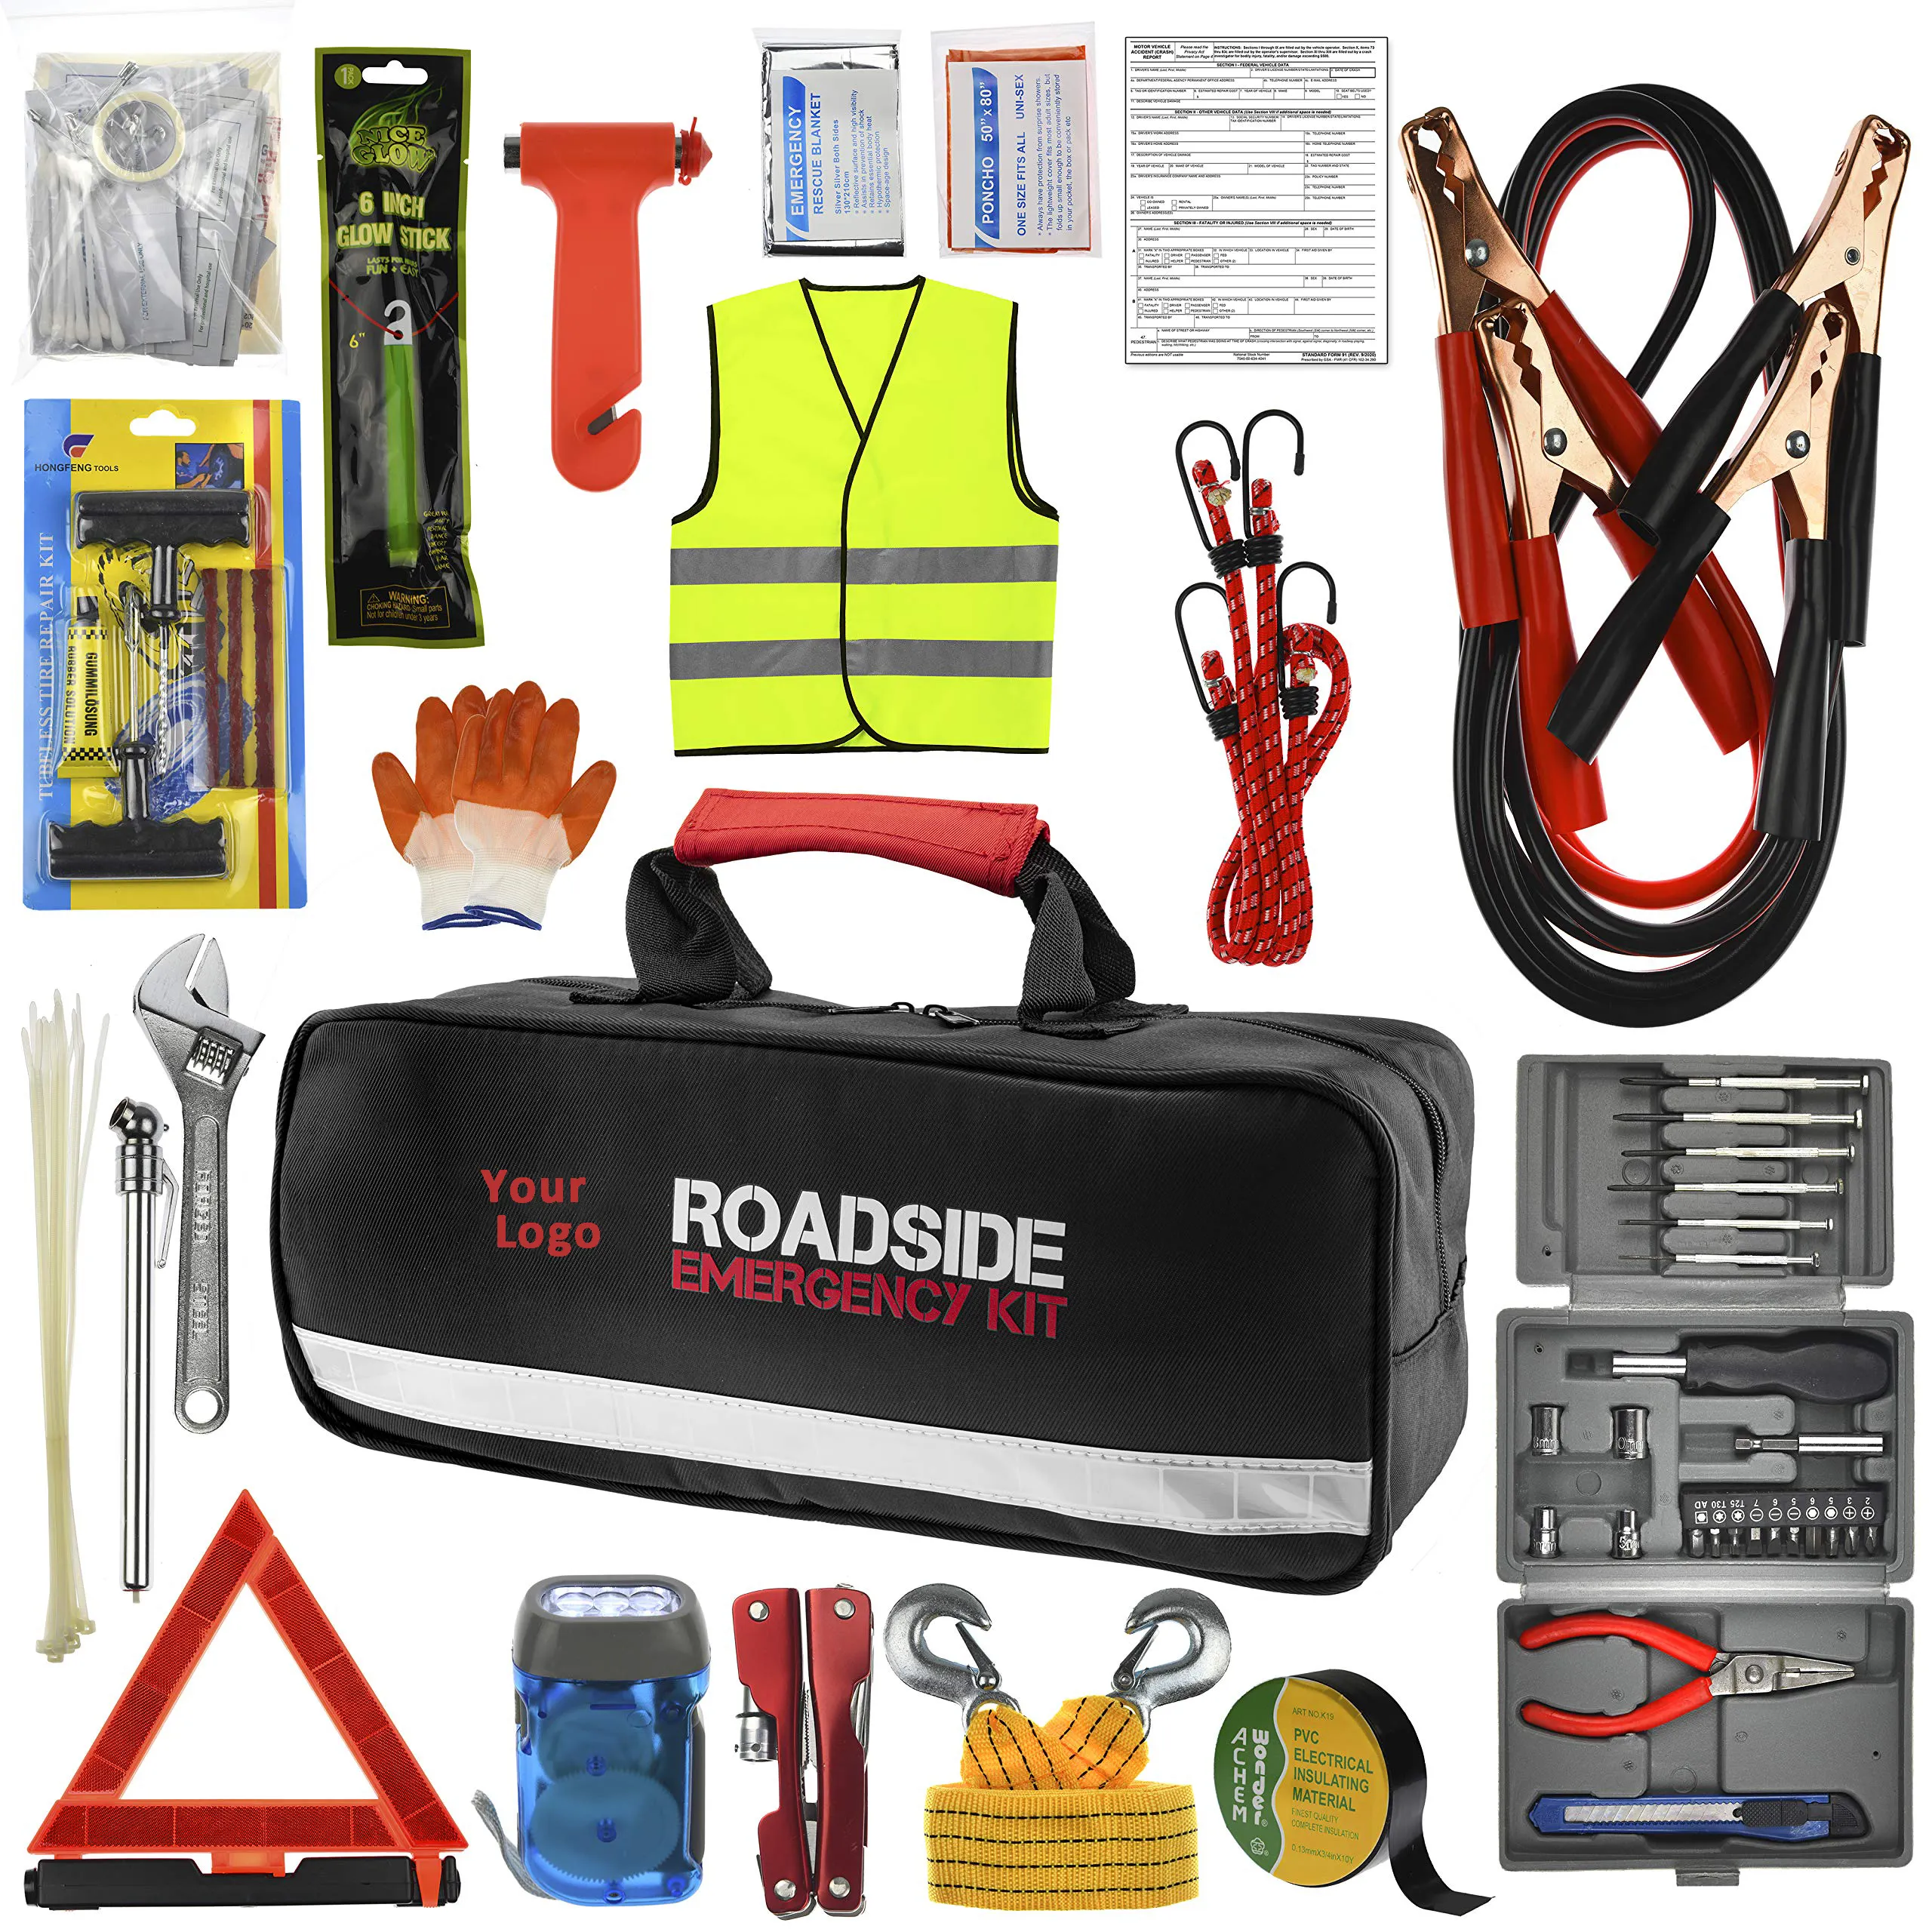 Big sellers Supplier Roadside Car Emergency Tool Kit with Heavy-Duty Jumper Cables for vehicle Black